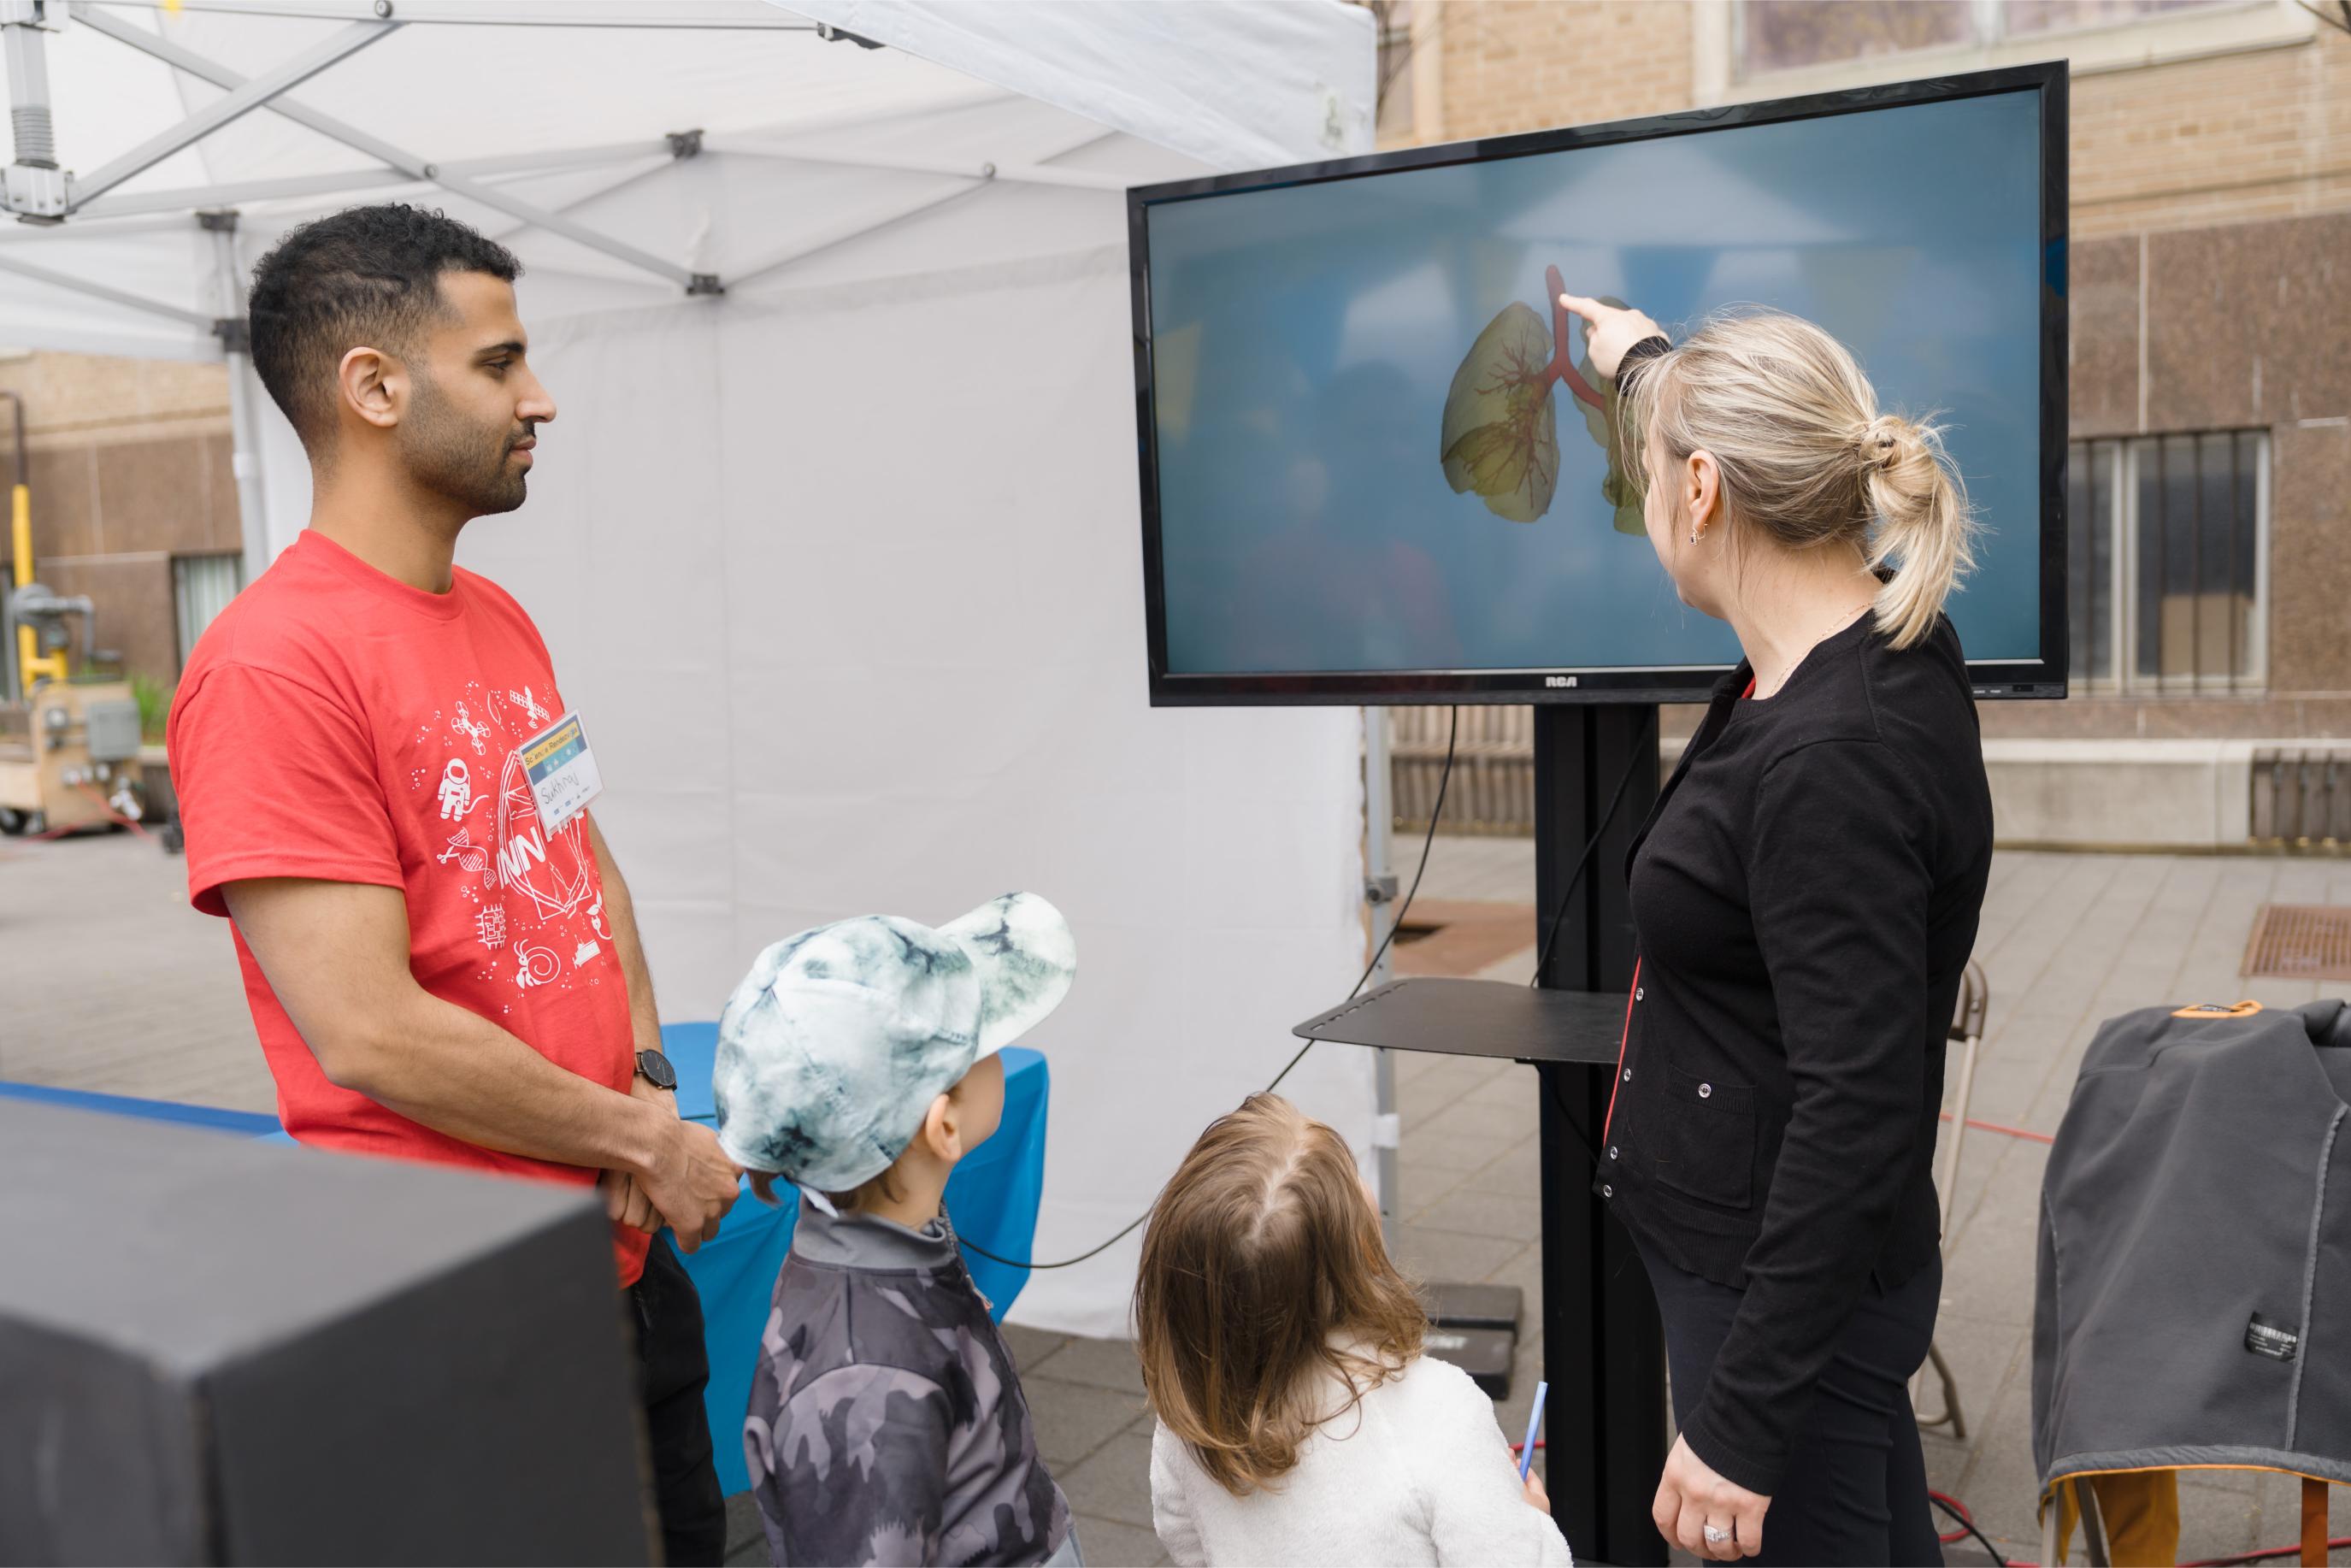 A volunteer engaging with a family of three at the Lung Function Booth.